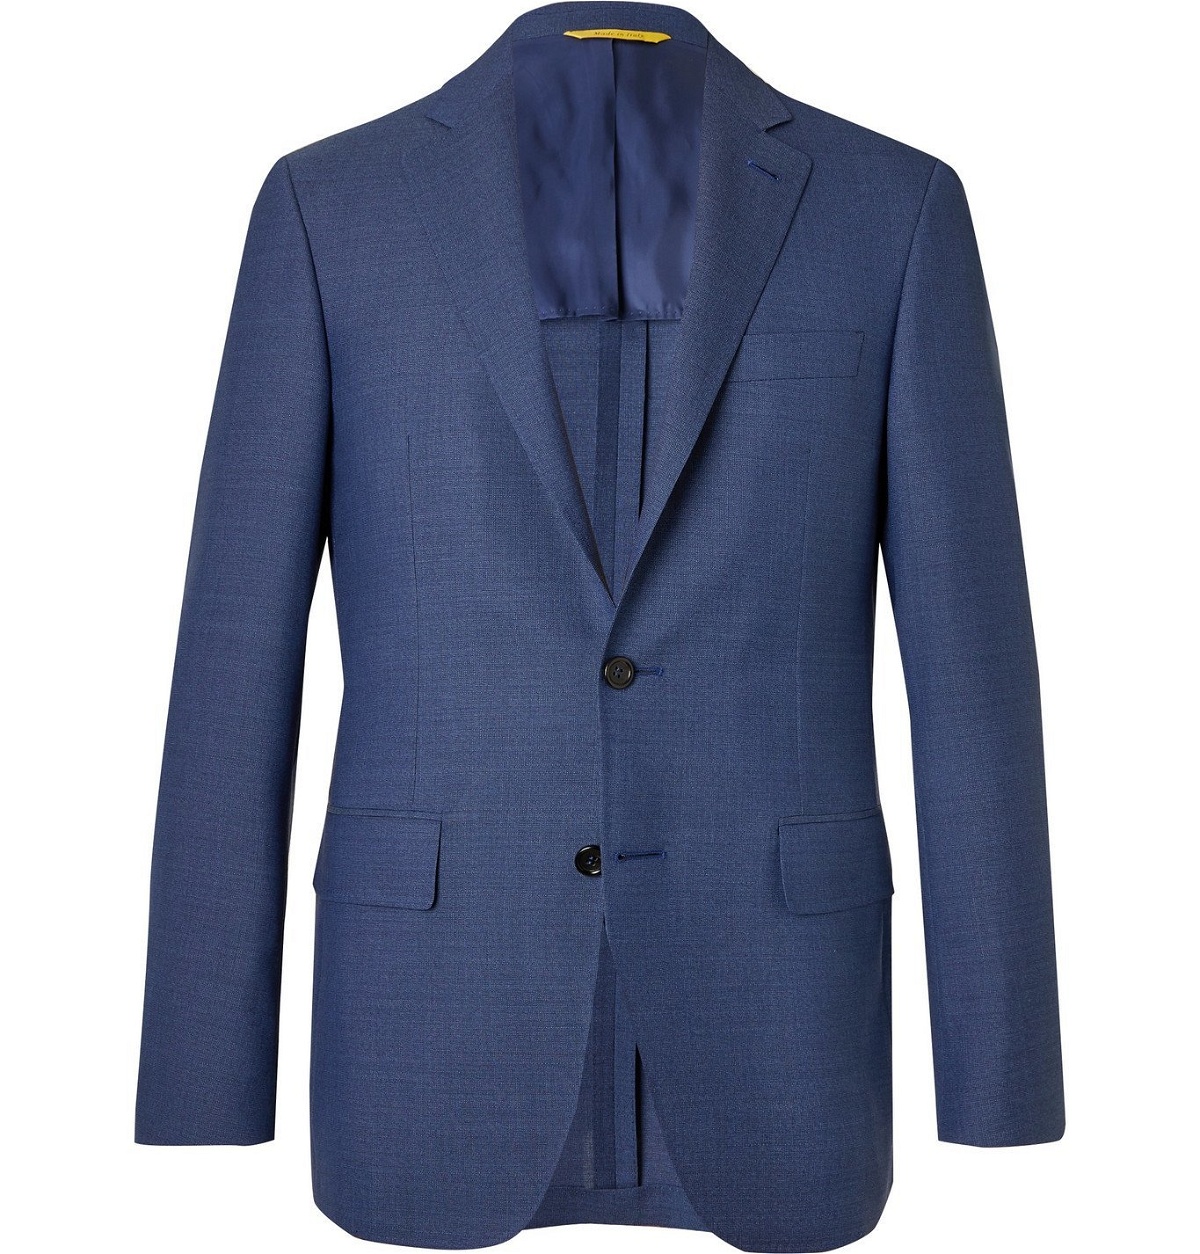 Canali - Wool Suit Jacket - Blue Canali